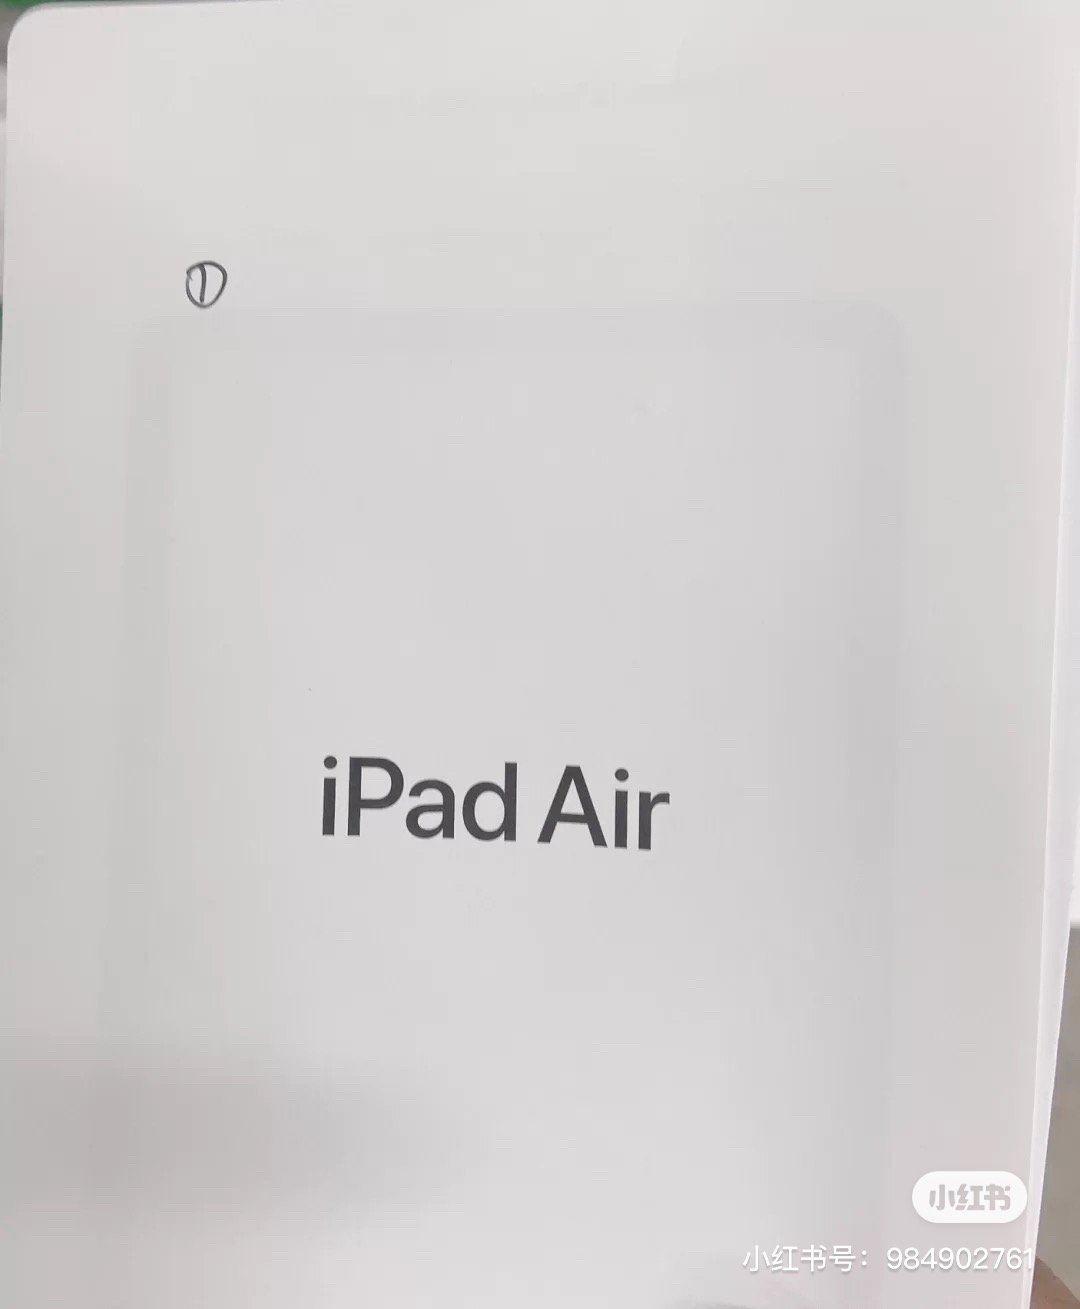 Alleged iPad Air 4 Manual Reveals Full-Screen Design, Touch ID Power Button, USB-C [Images]